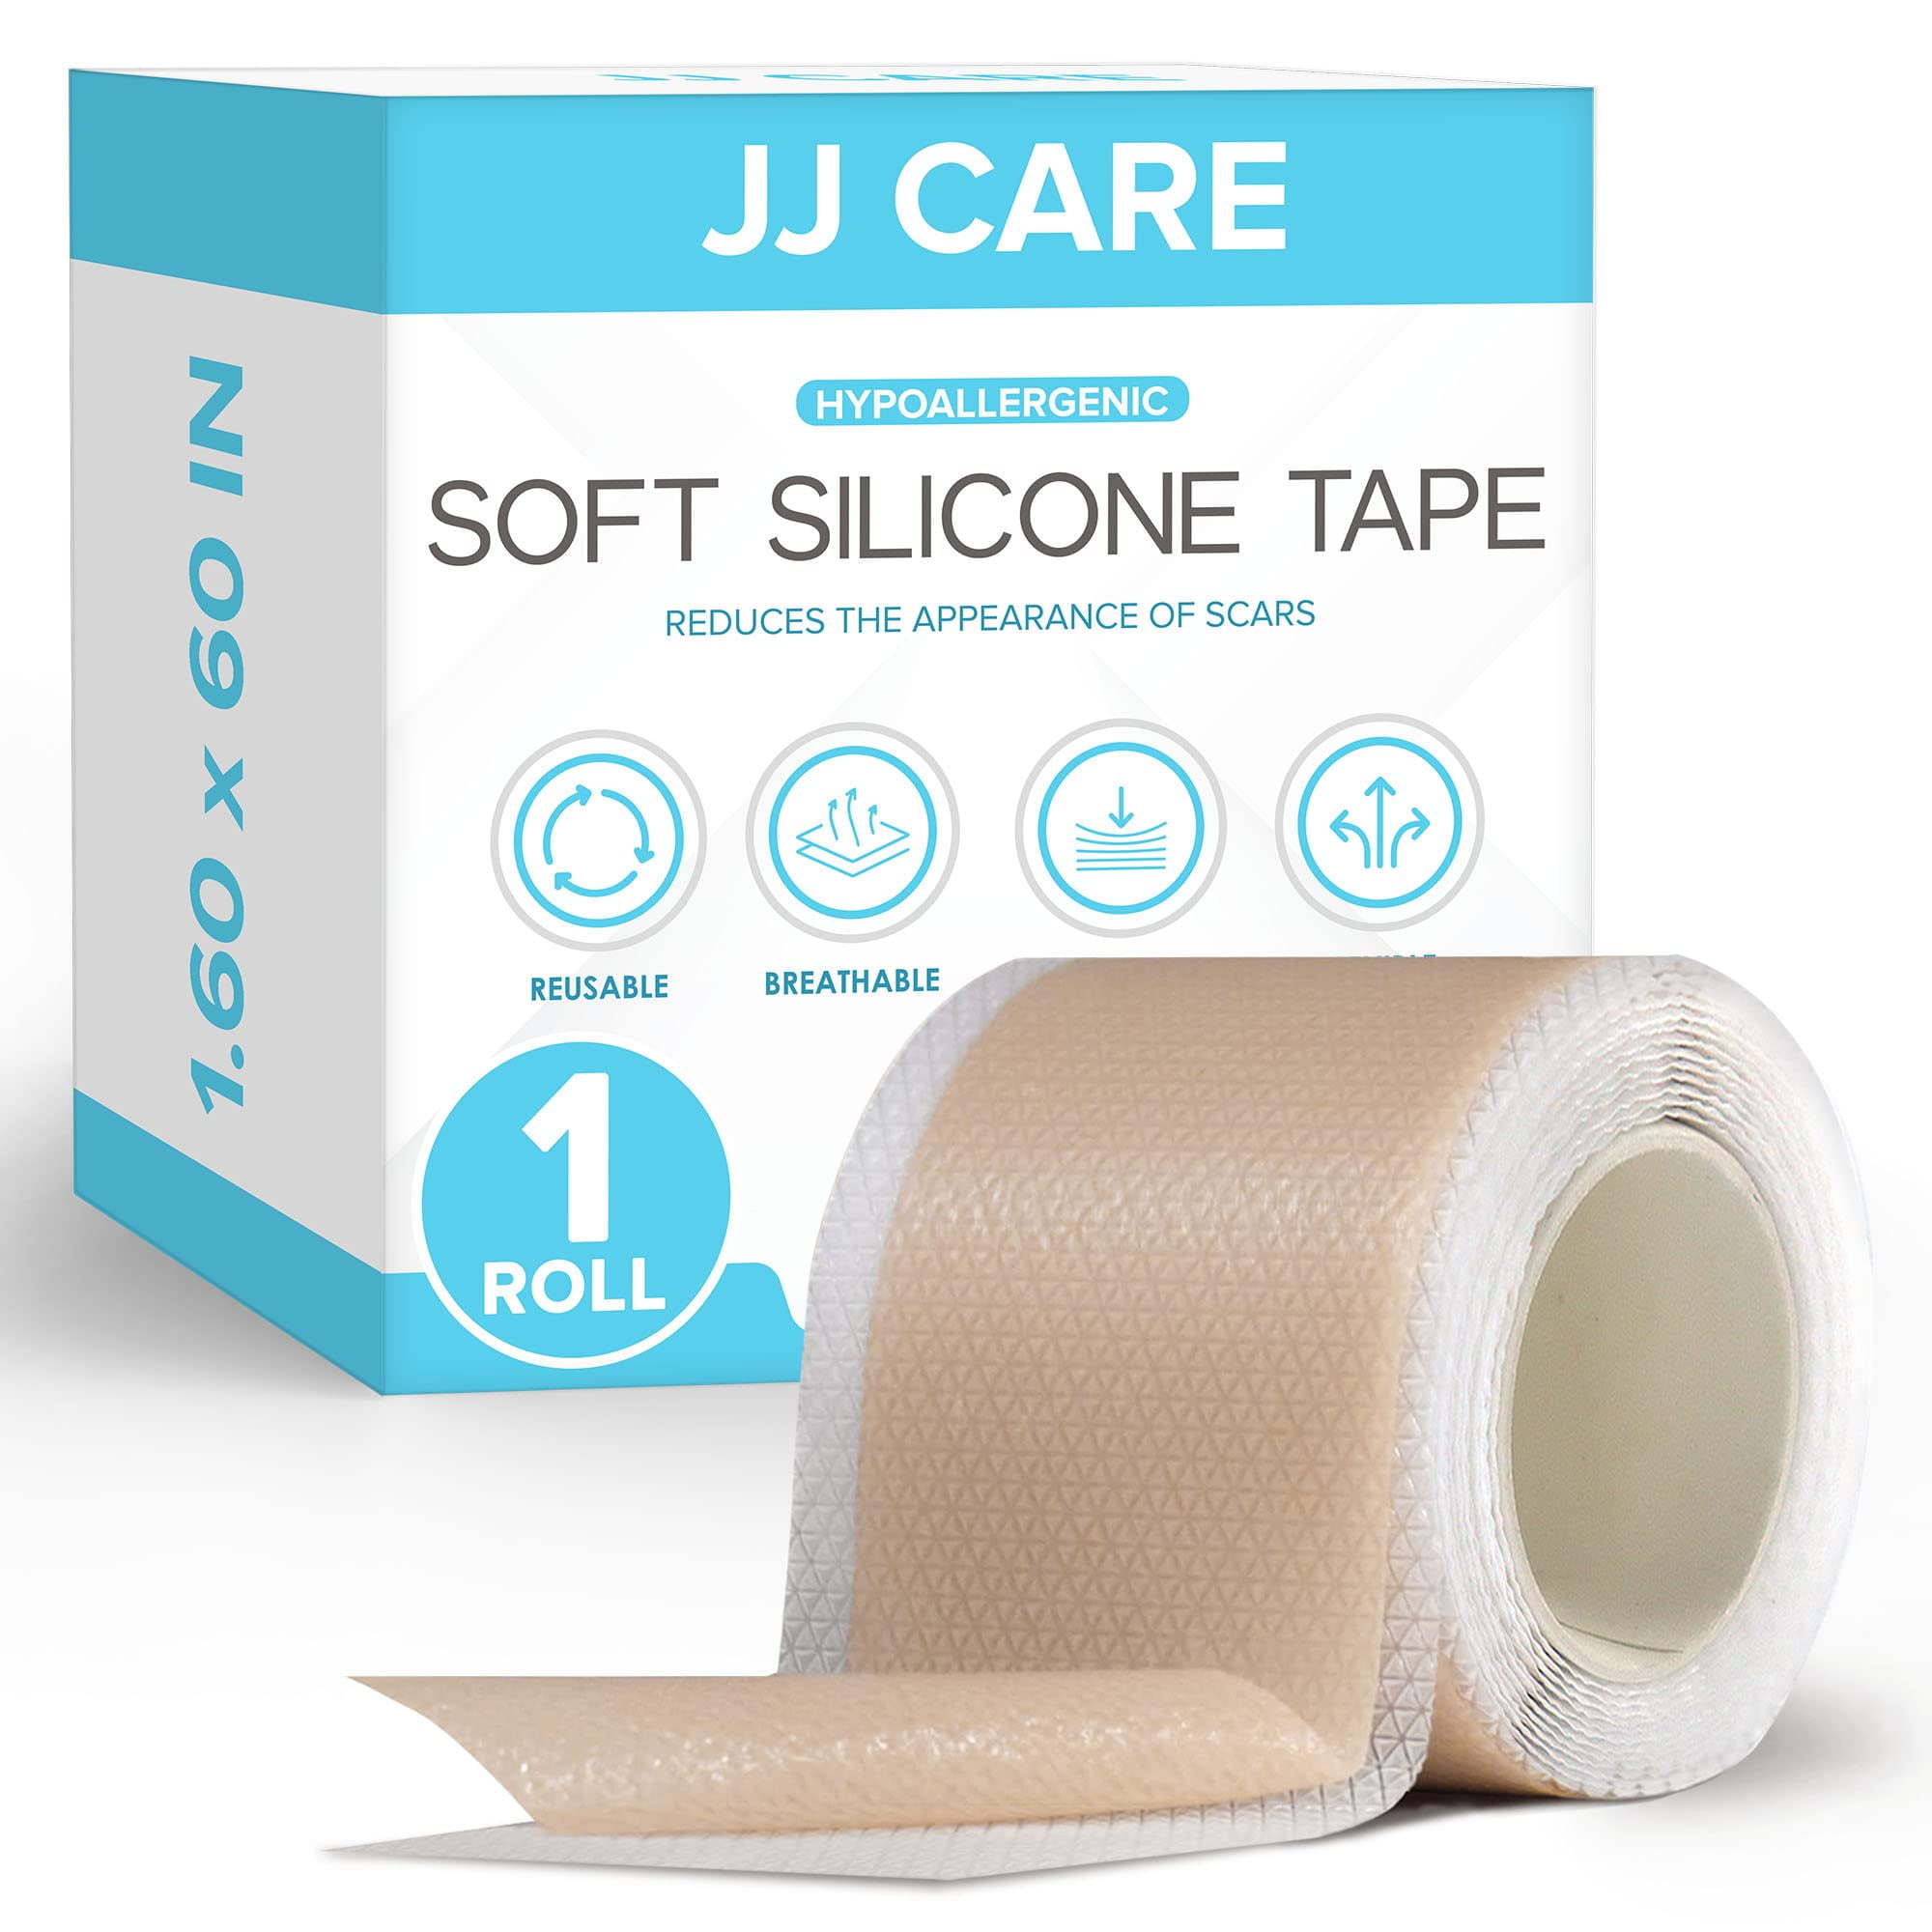 JJ CARE Soft Silicone Tape, 1.6” x 60” Flexible Silicone Scar Tape, Medical  Grade Silicone Strips for Scars, Washable & Reusable Scar Tape for Surgical  Scars, Latex-Free Scar Tape 